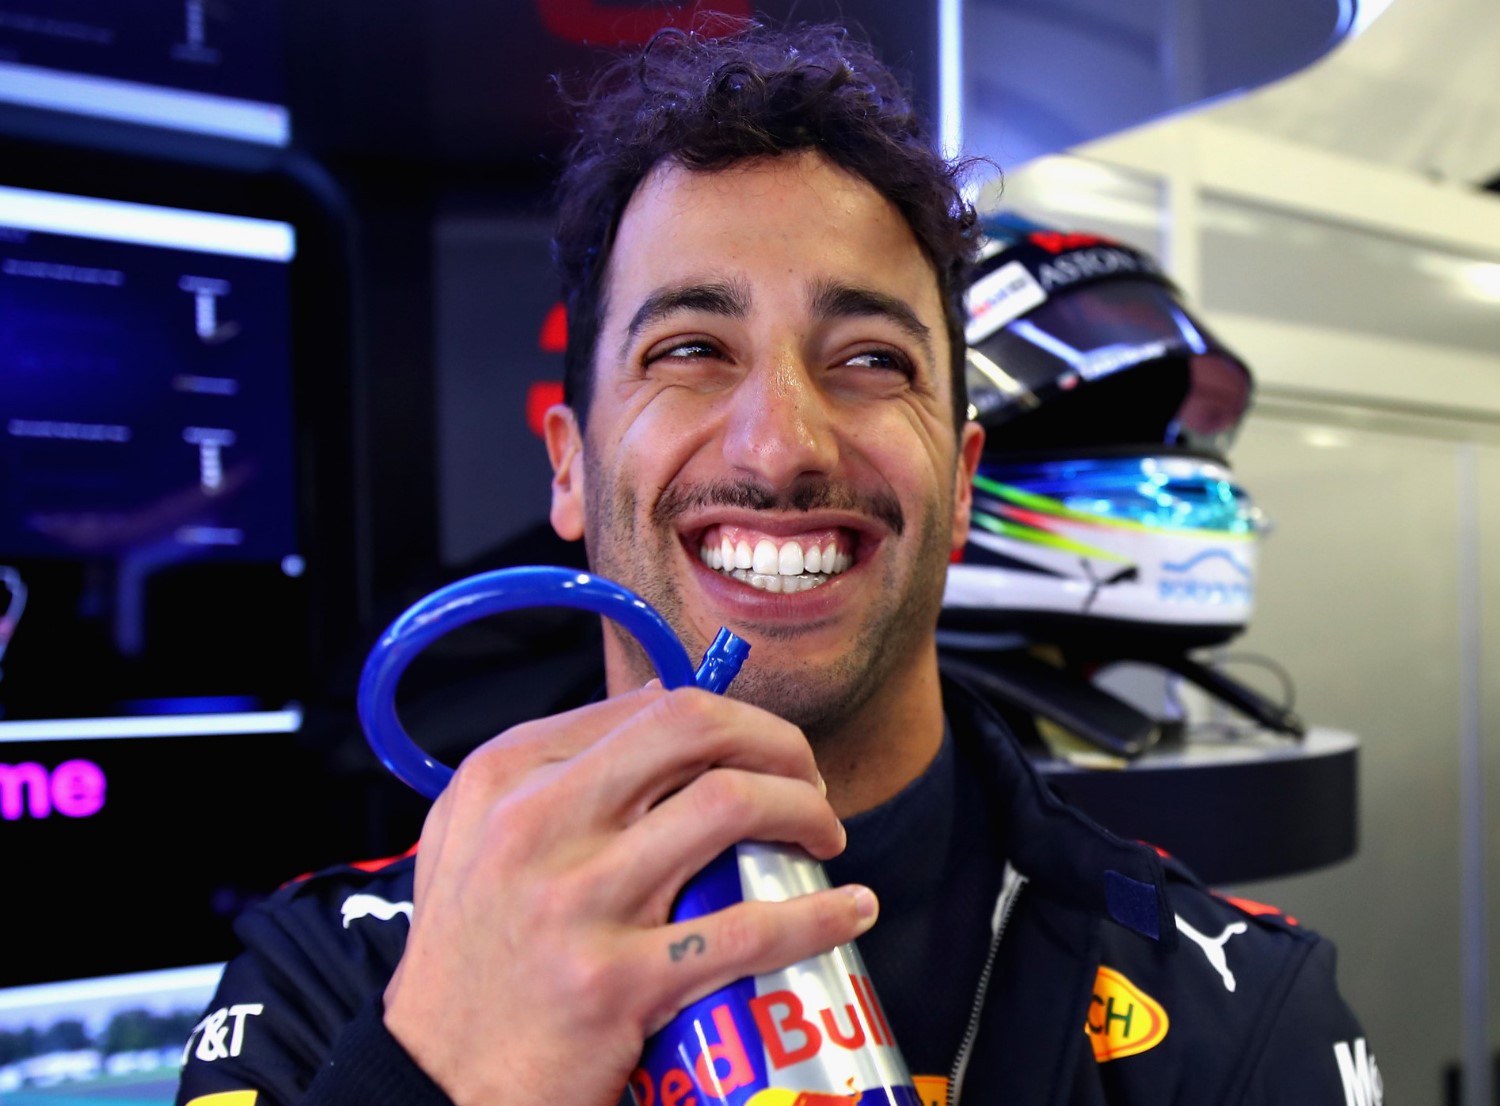 Verstappen wanted to wipe that smile off of Ricciardo's face....and he did